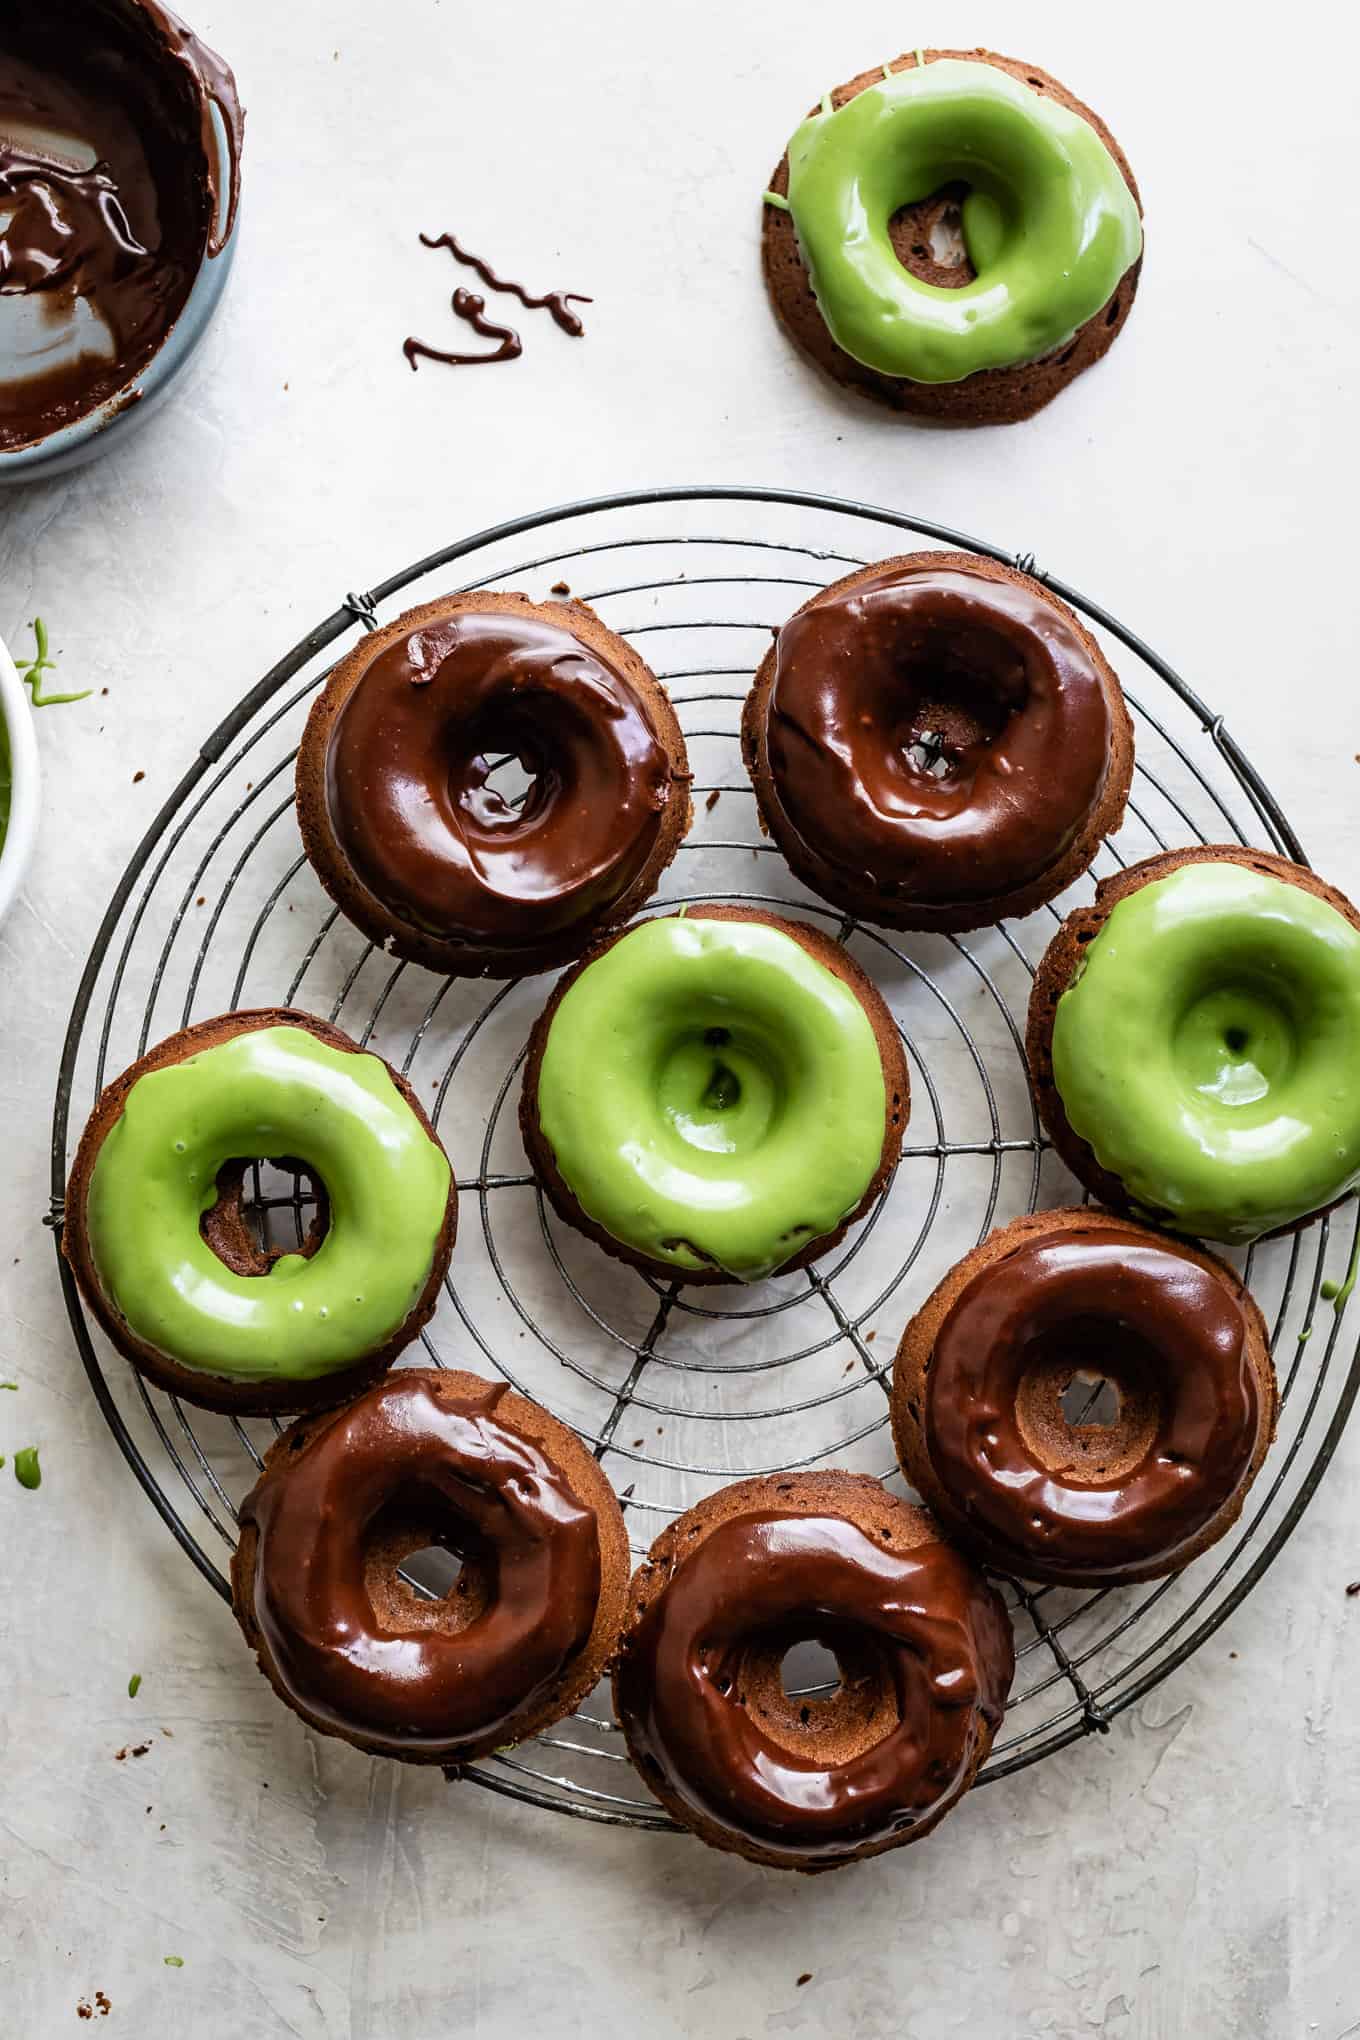 Mochi Donuts with Chocolate and Matcha